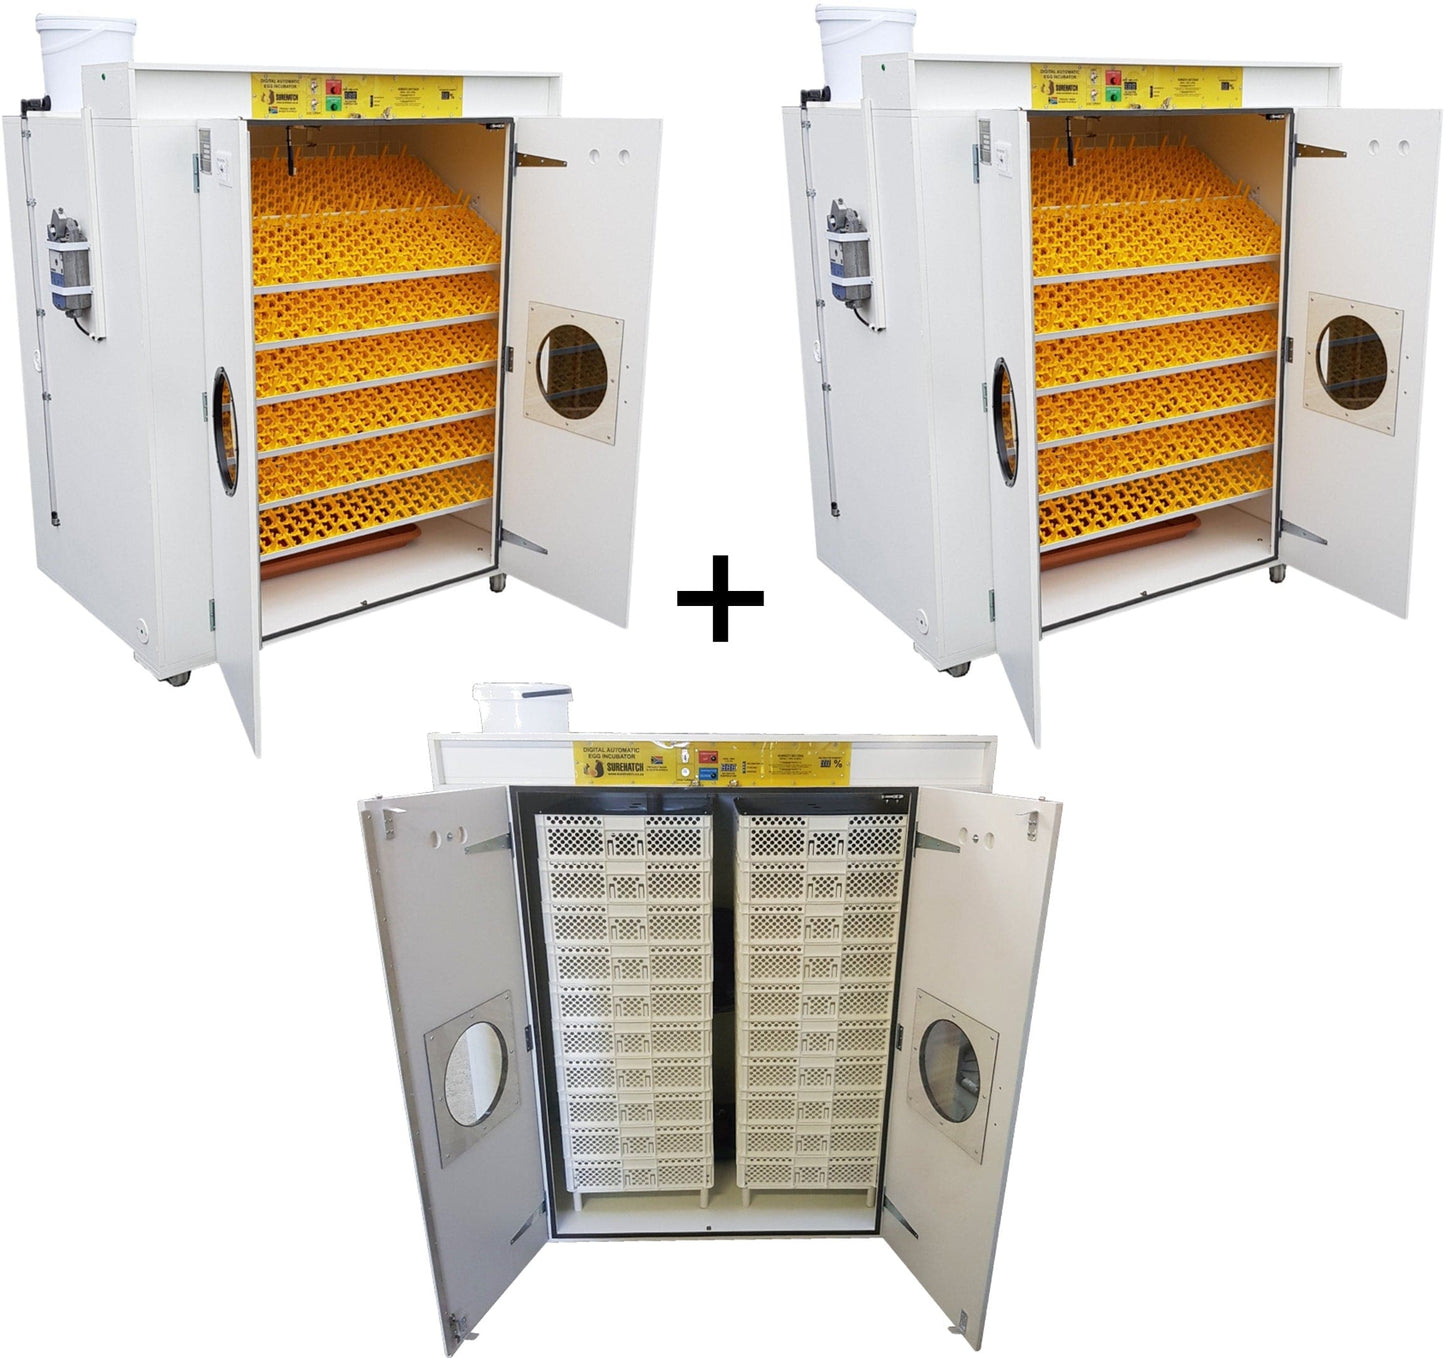 Commercial egg incubator and hatcher for sale in USA